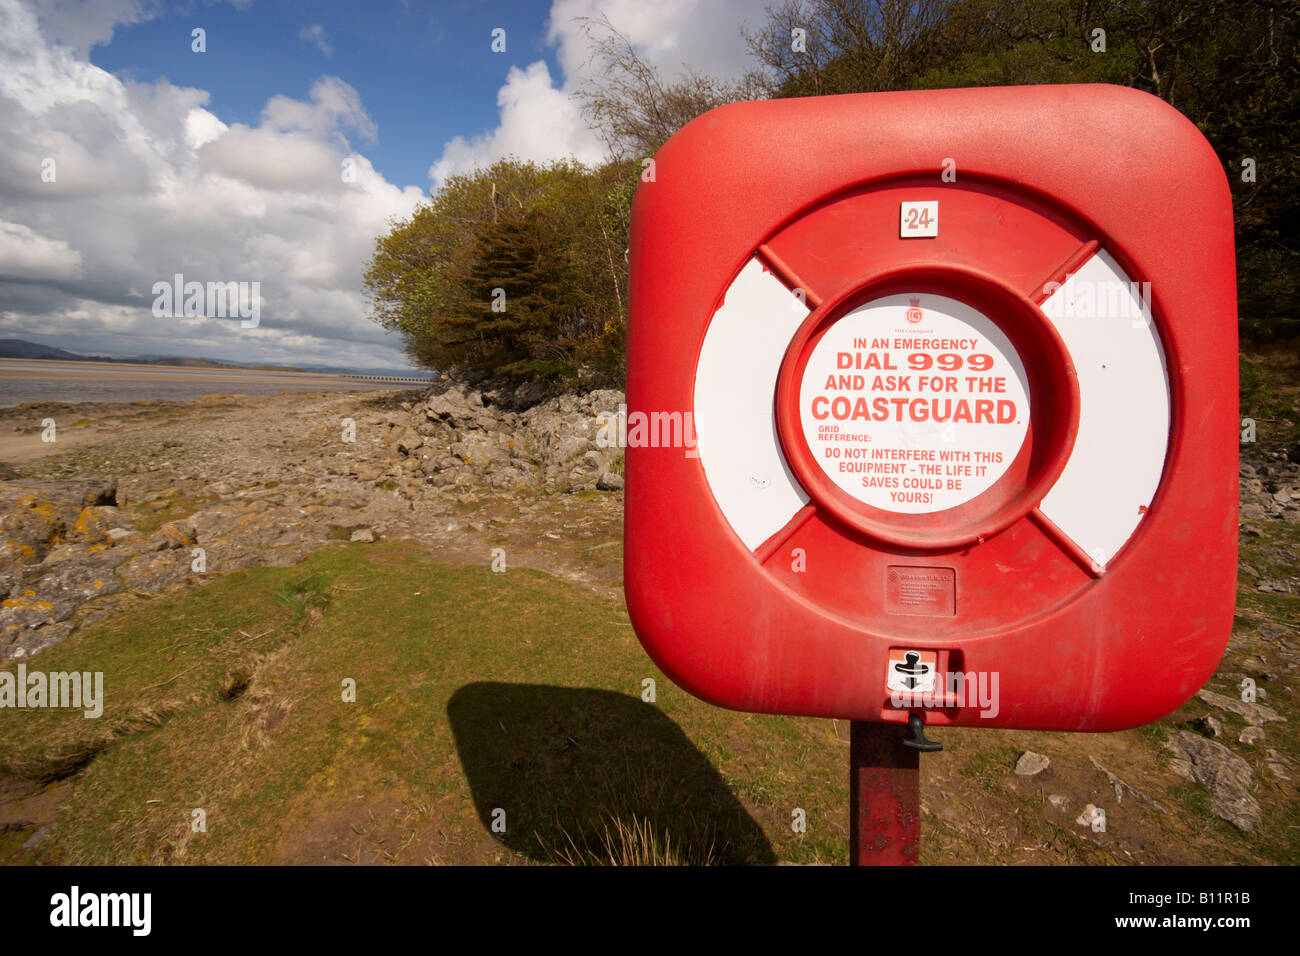 Views from Arnside estuary beach in Lancashire Lake District England showing an emergency equipment life jacket Stock Photo